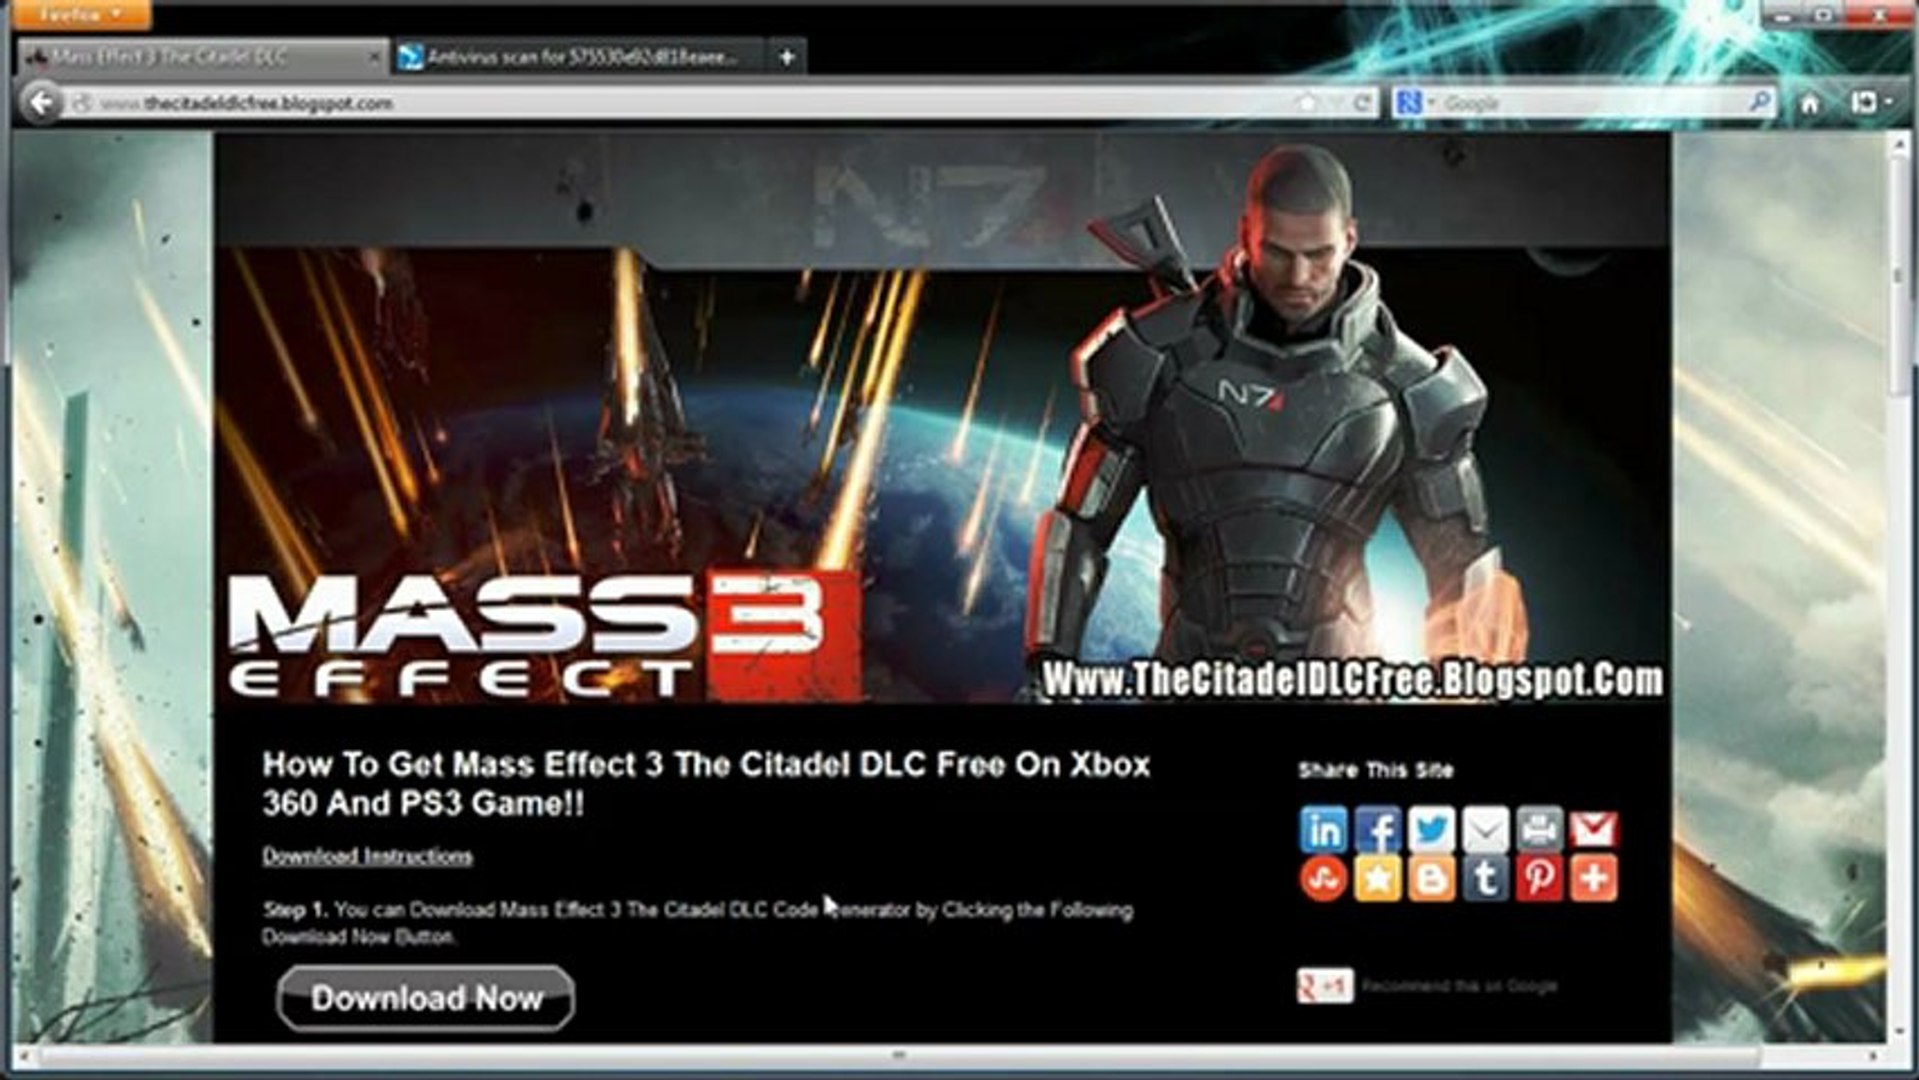 Download Mass Effect 3 The Citadel DLC Code Free - video Dailymotion